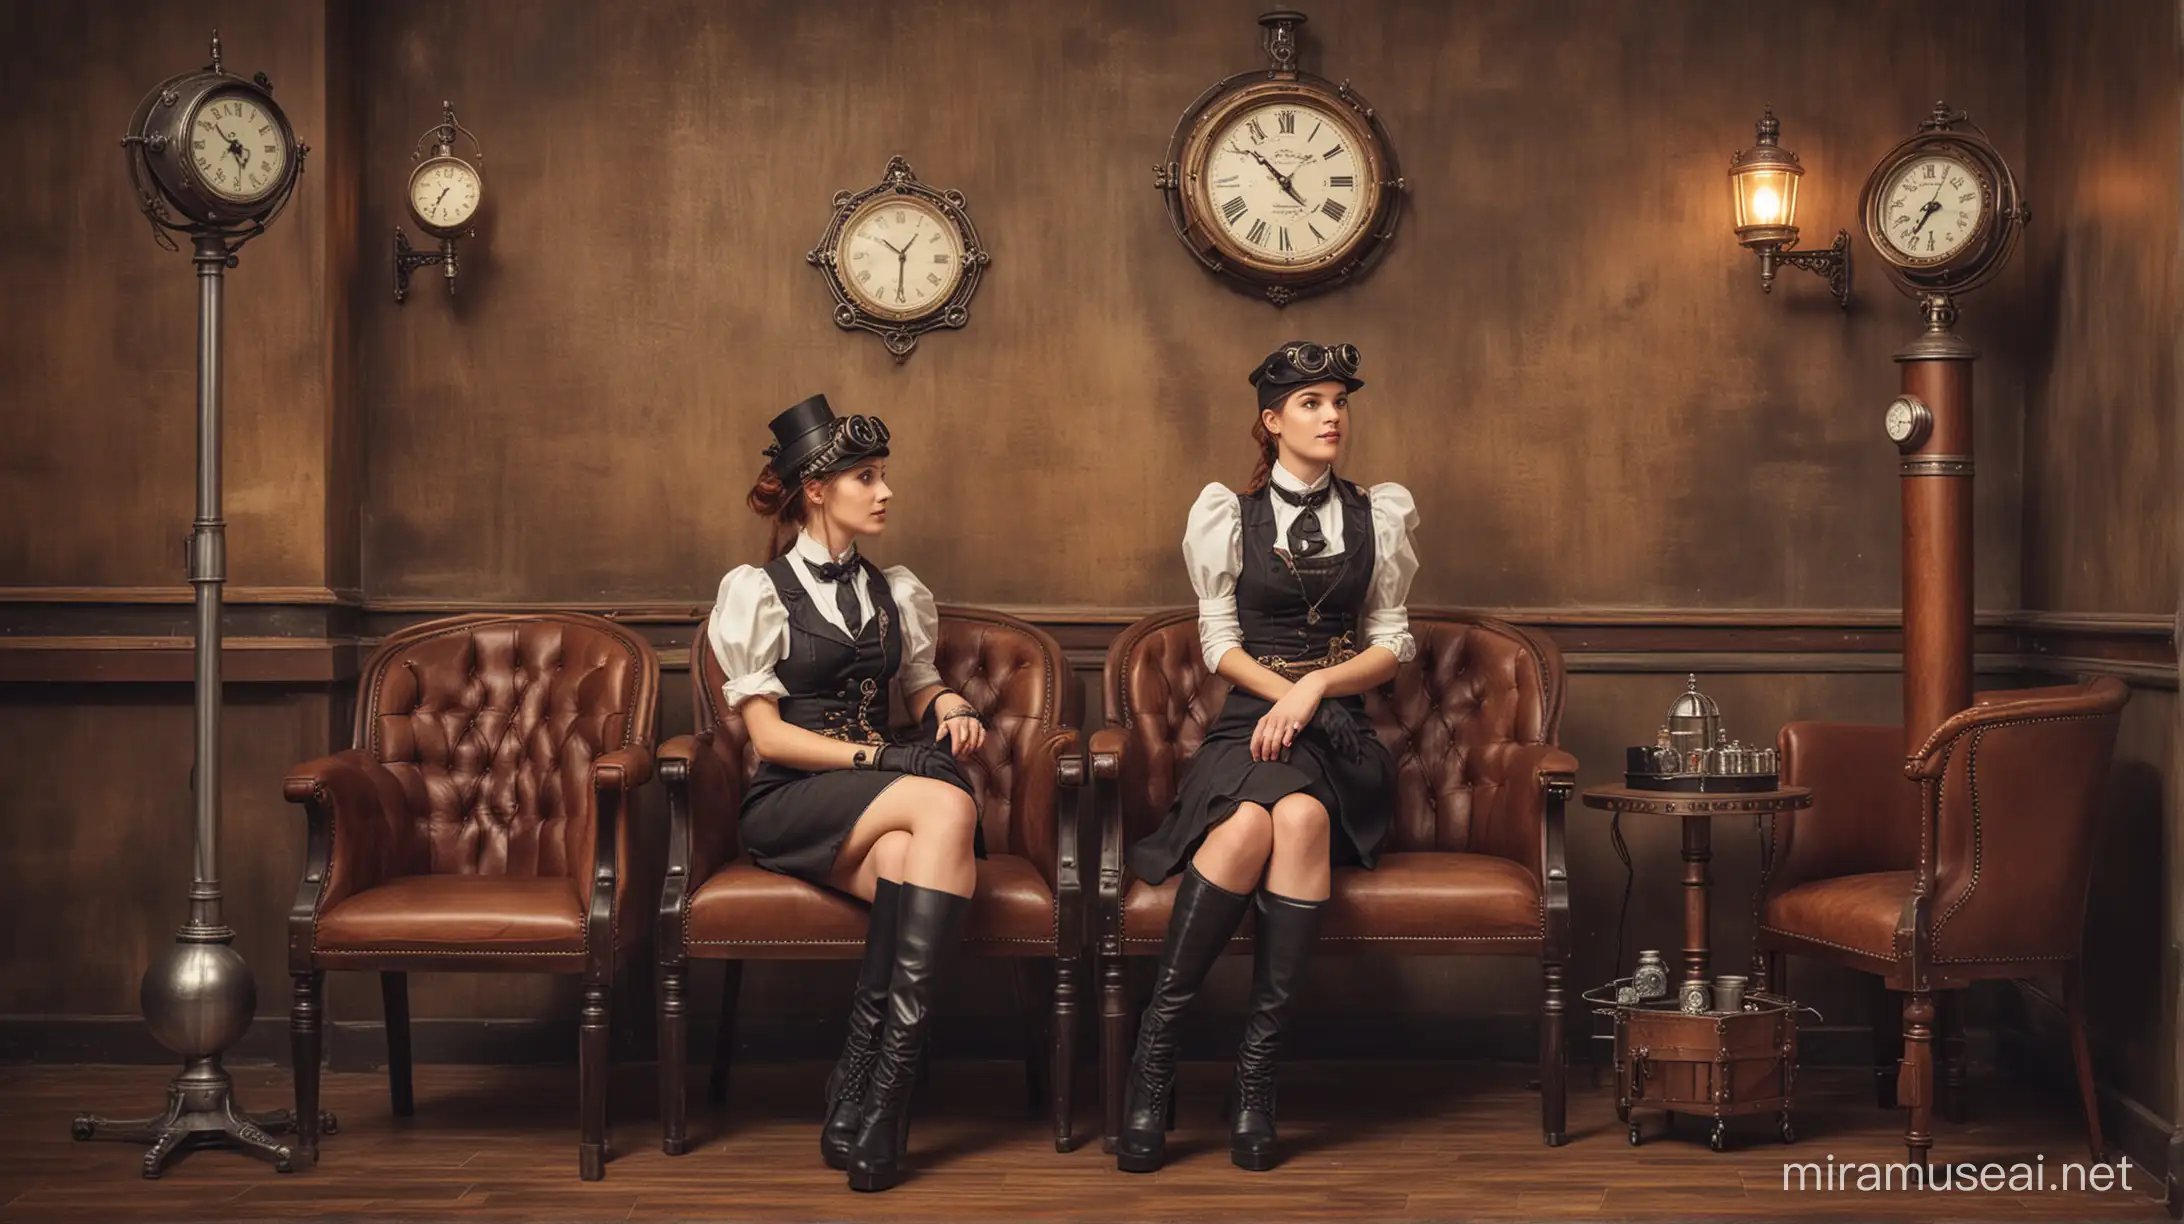 doctor steampunk waiting room. two steampunk women wait for the visit.